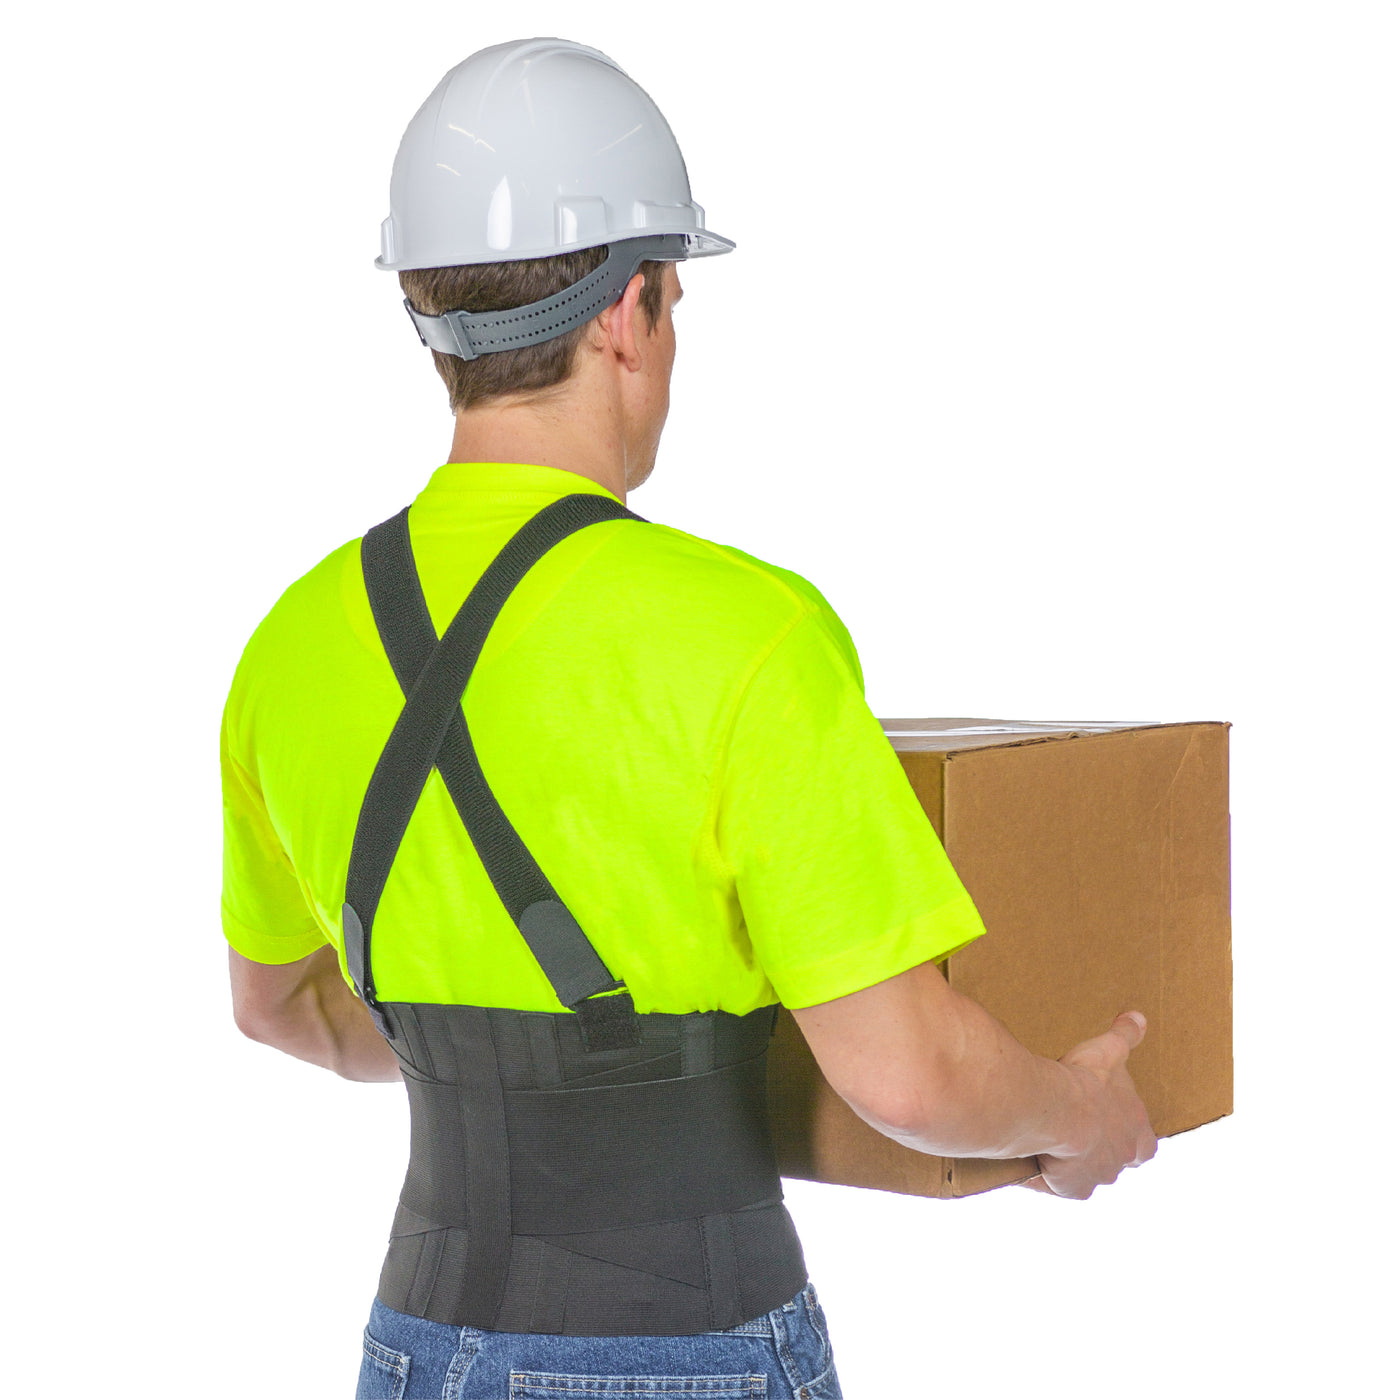 Braceability Industrial Work Back Brace | Removable Suspender Straps for Heavy Lifting Safety - Lower Back Pain Protection Belt